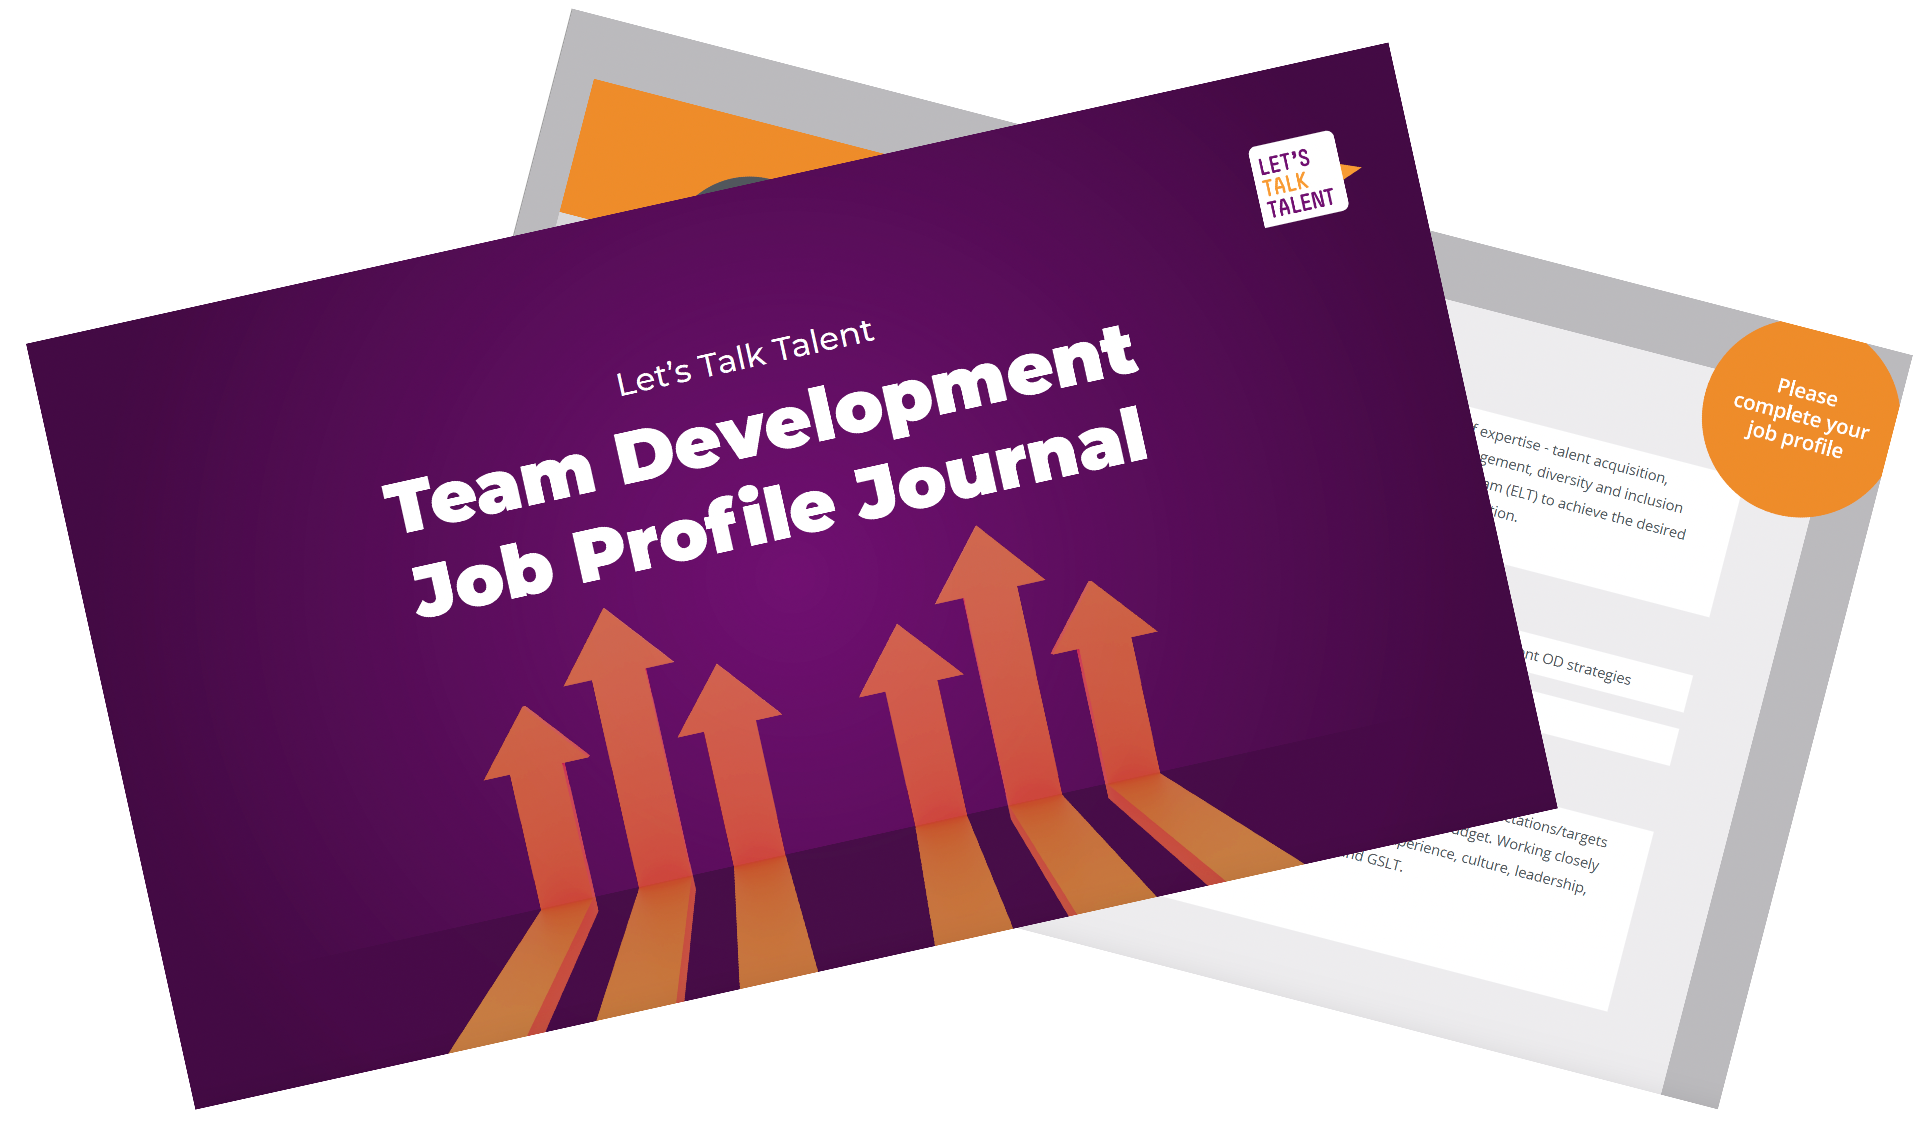 download-a-blank-job-profile-journal-template-let-s-talk-talent